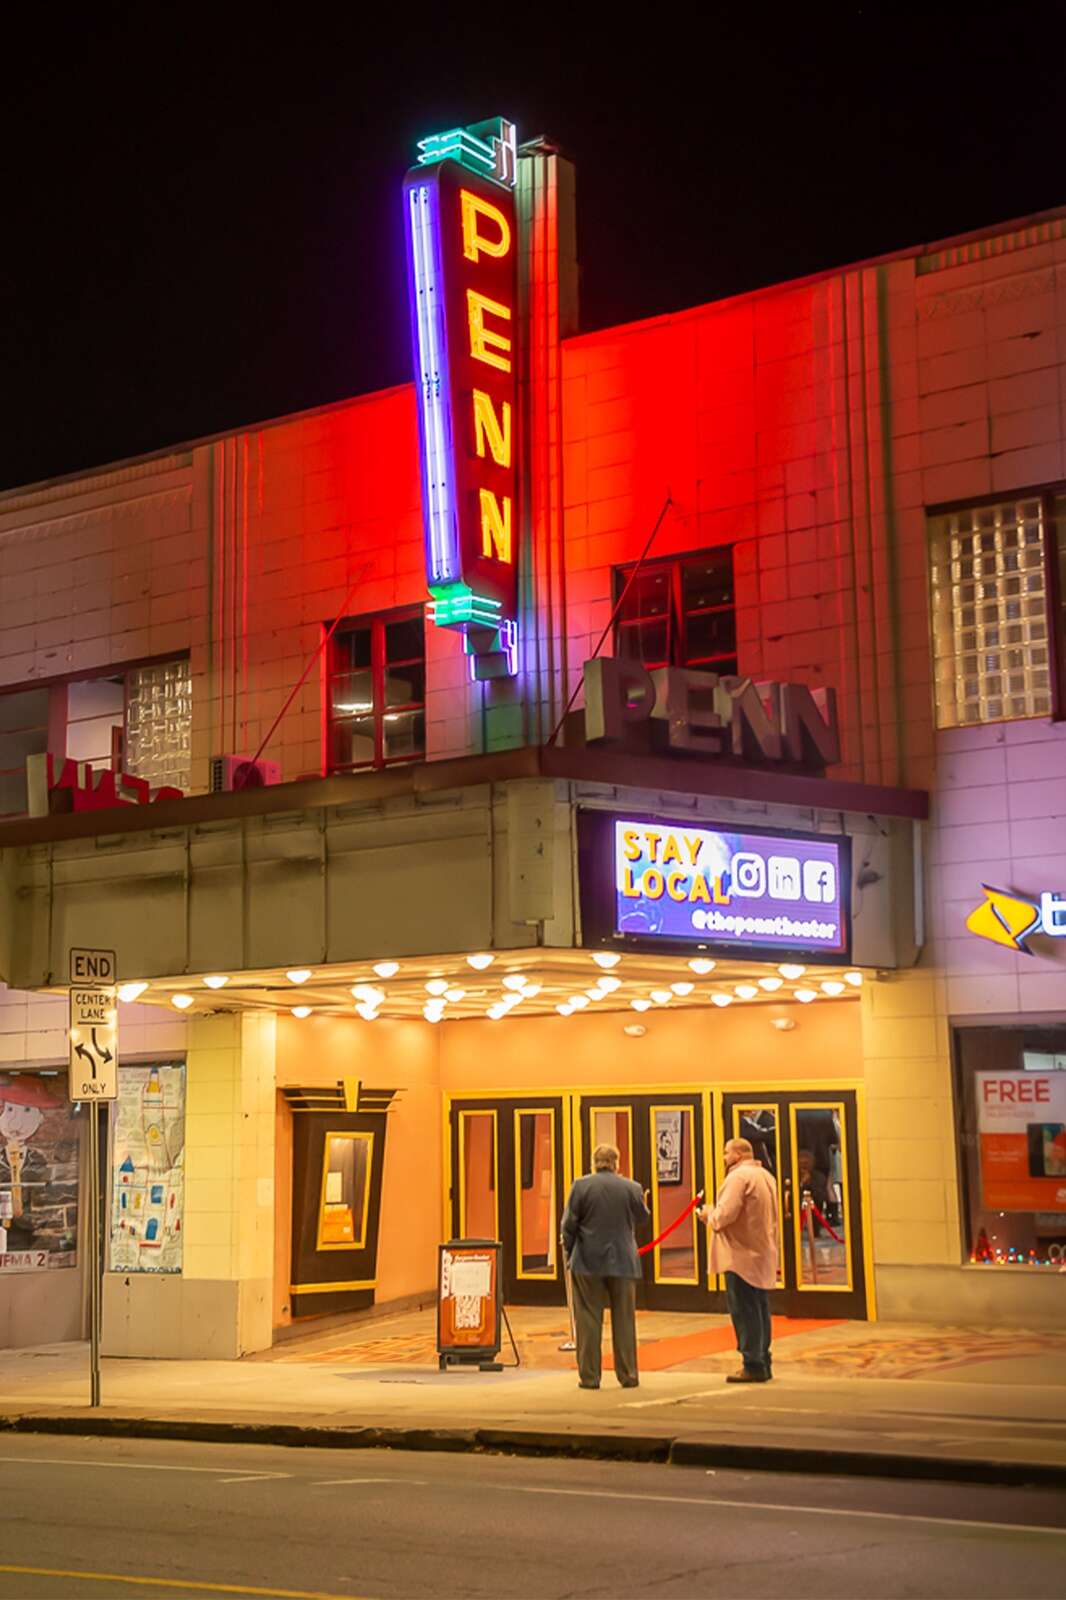 The Penn Theater marquee was lit up for a private event